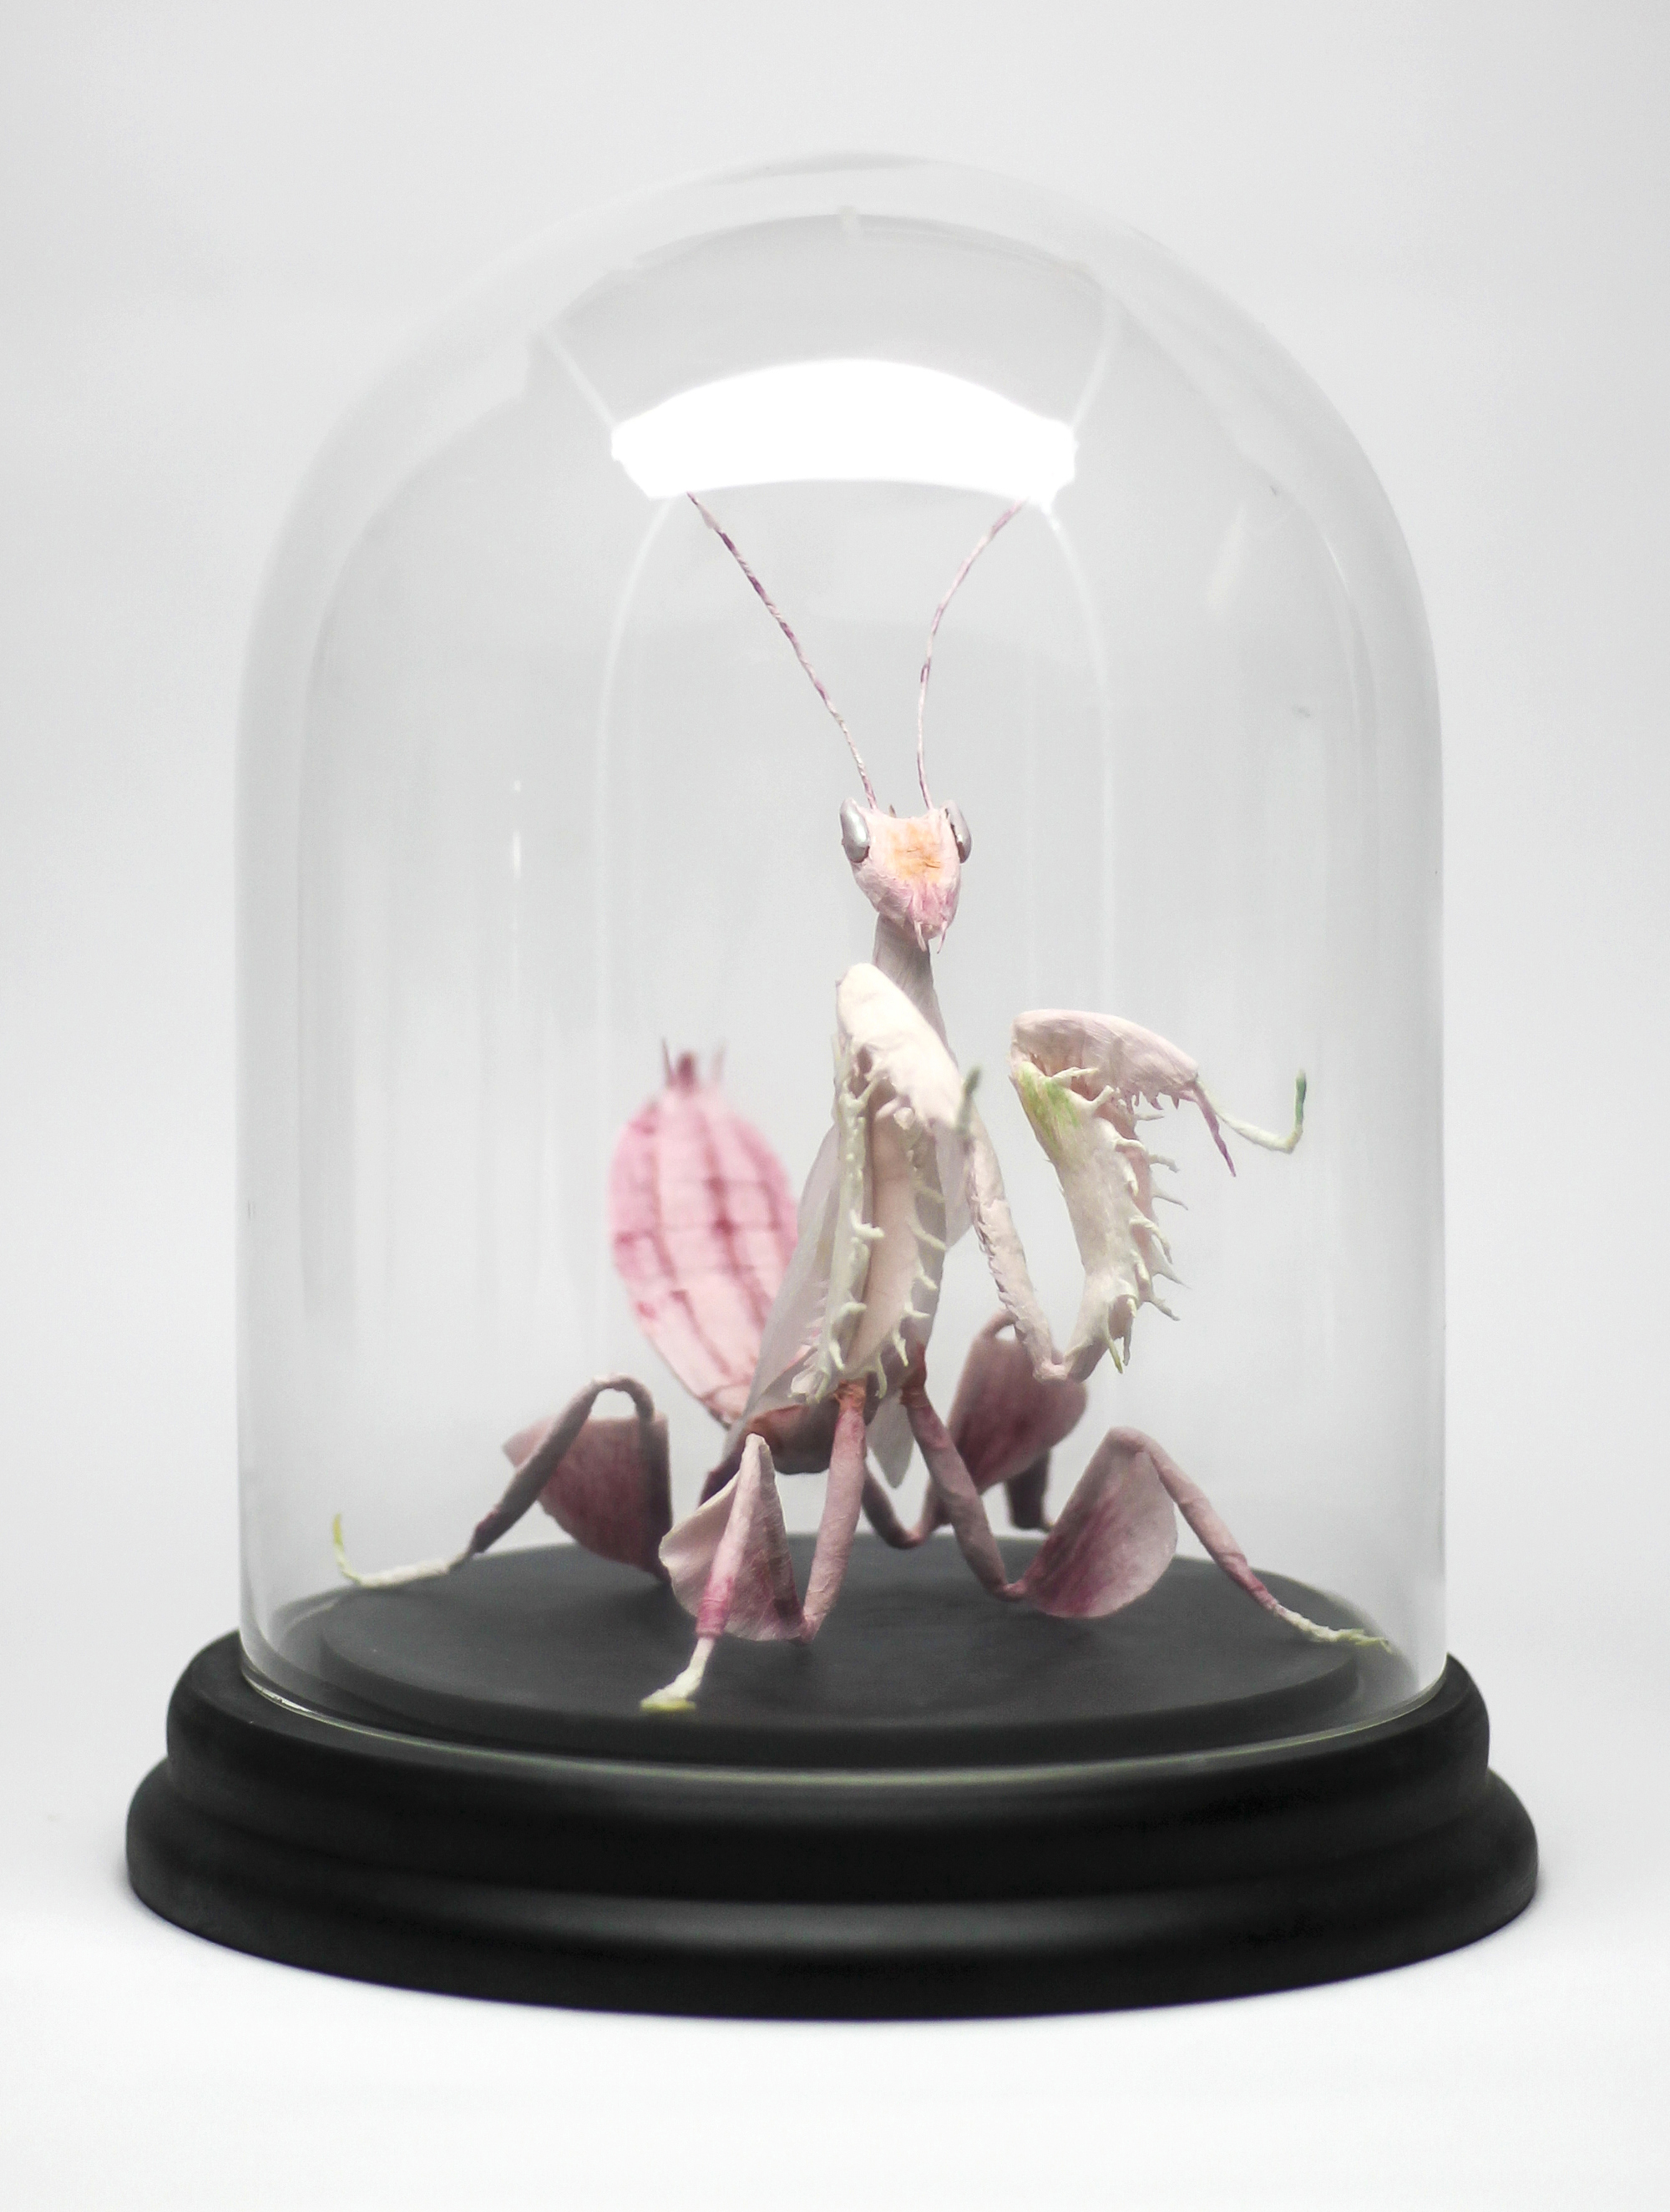 Crepe_Paper_Insects_PaperArt_Praying_orchid_mantis_by_faltmanufaktur09